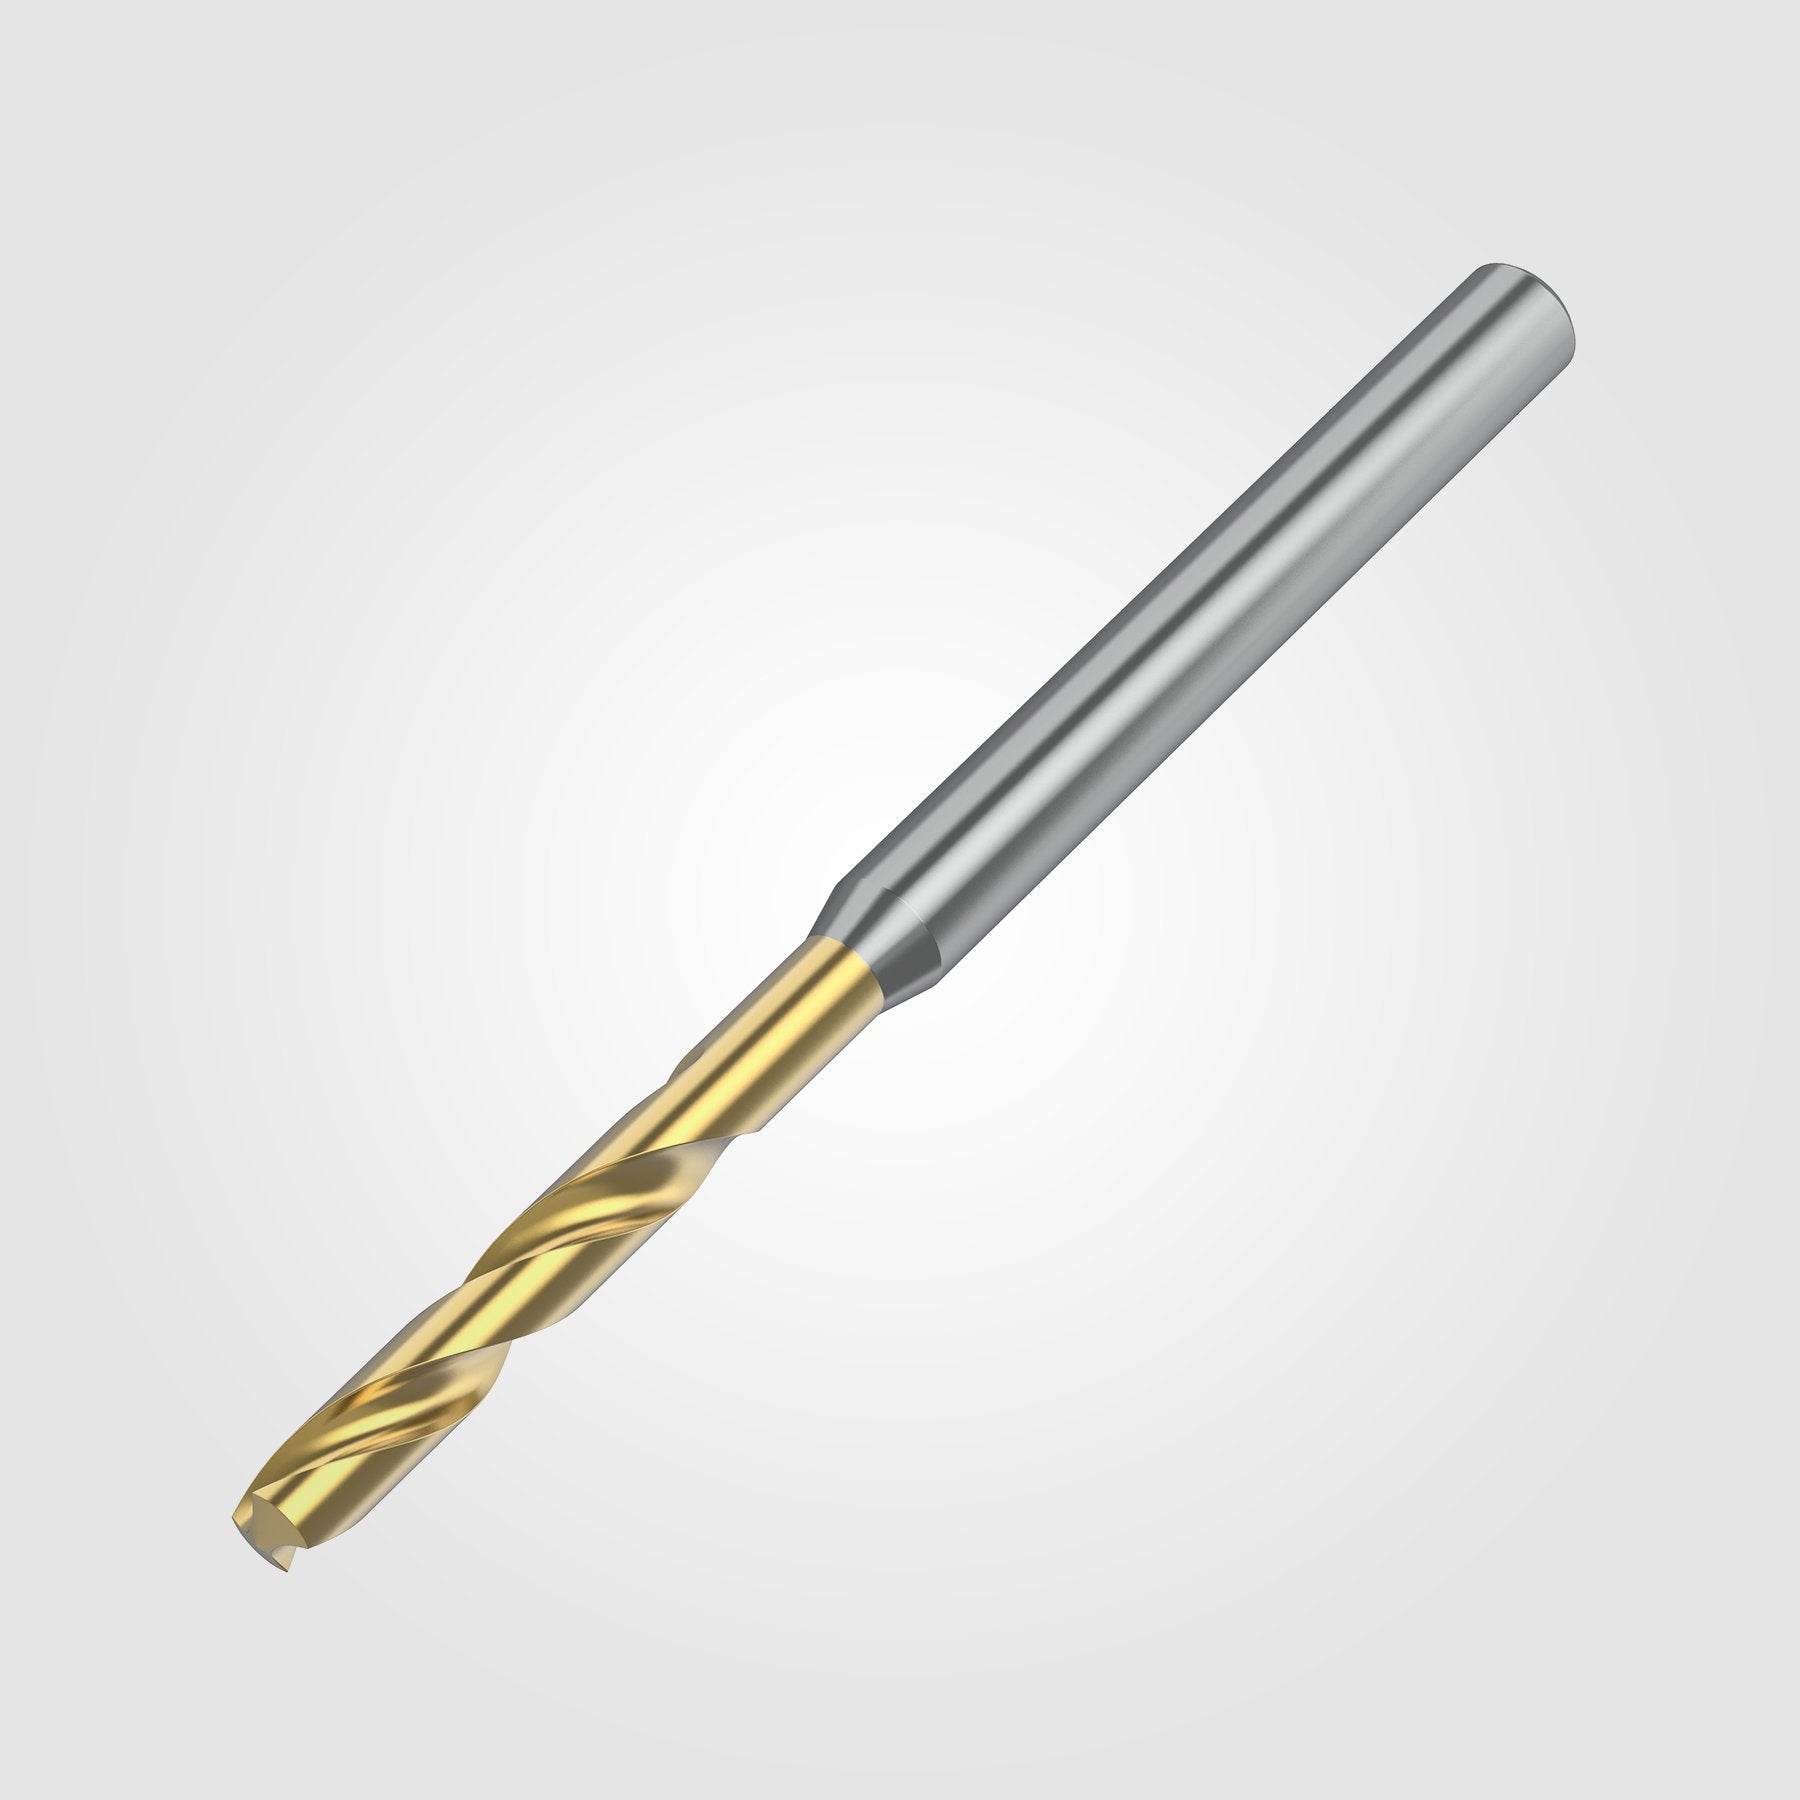 GOdrill (THROUGH COOLANT) | 18.654mm / .7344" / 5xD | SOLID CARBIDE DRILL | 4149406